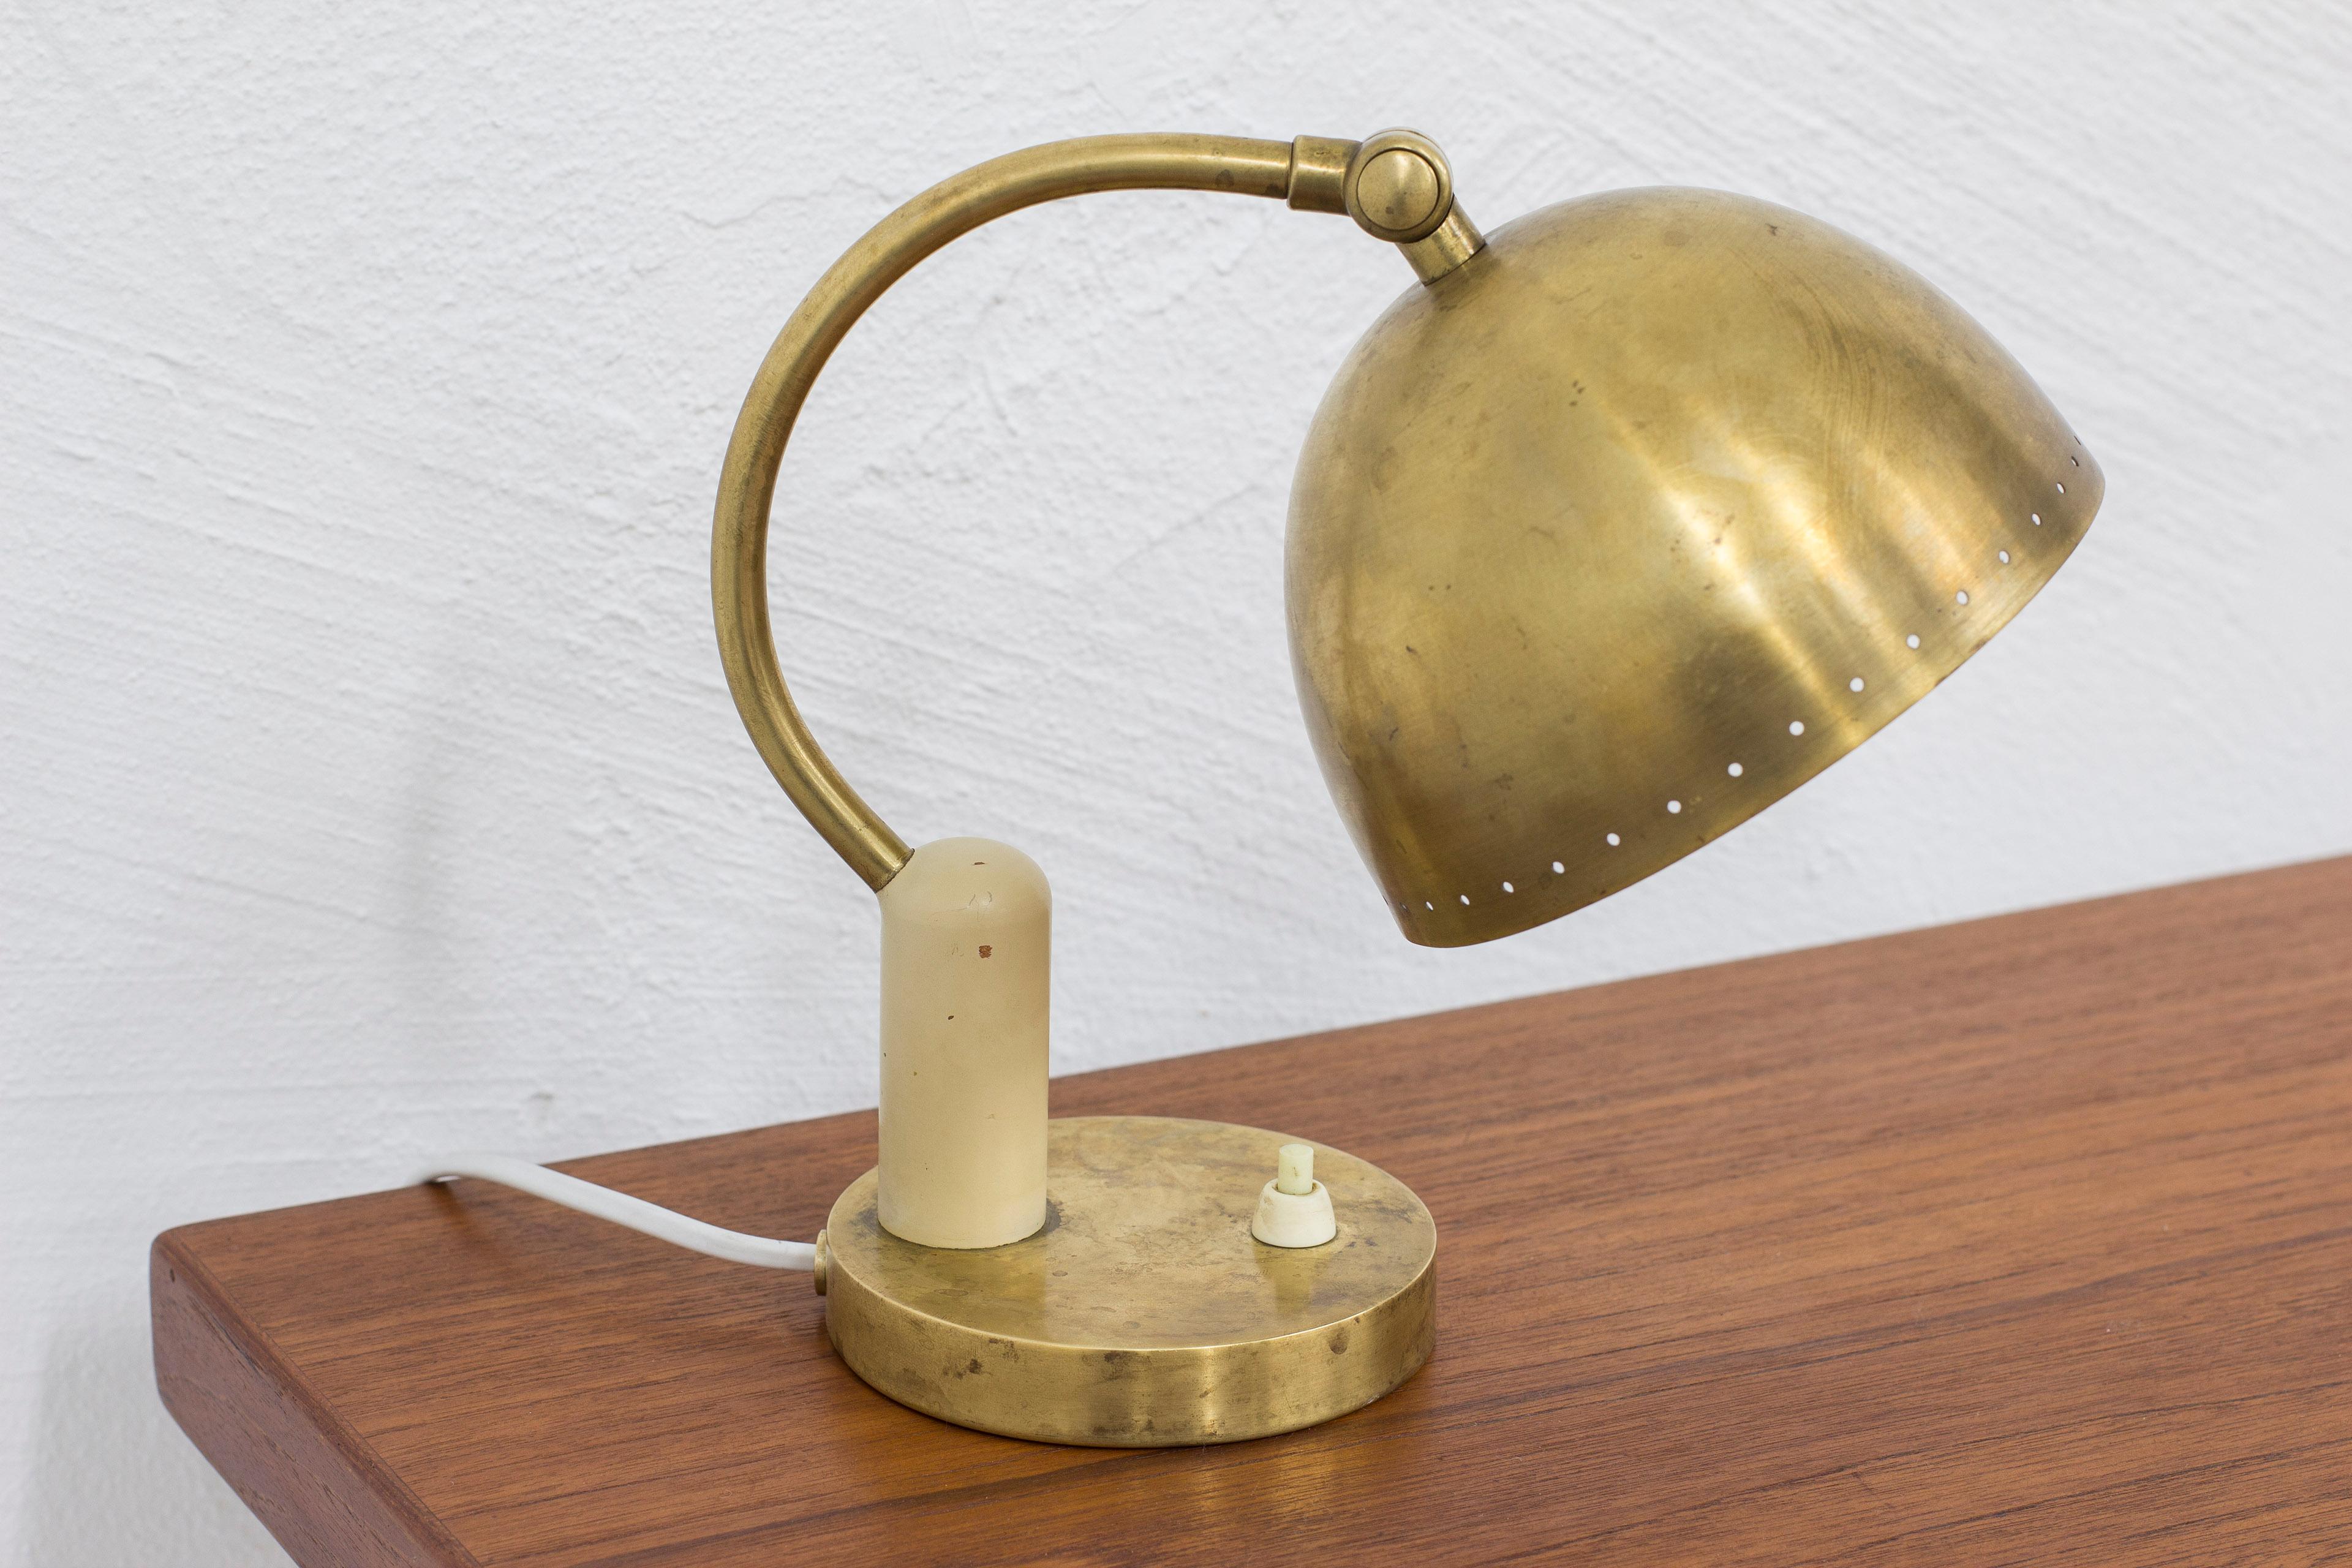 Table or wall lamp attributed to Nordiska Kompaniet, NK. Produced in Sweden during the 1930s. Made from brass and bone colored metal. Adjustable in angle. Light switch  on the base in working order. The lamp can also be hung as a wall lamp. Good